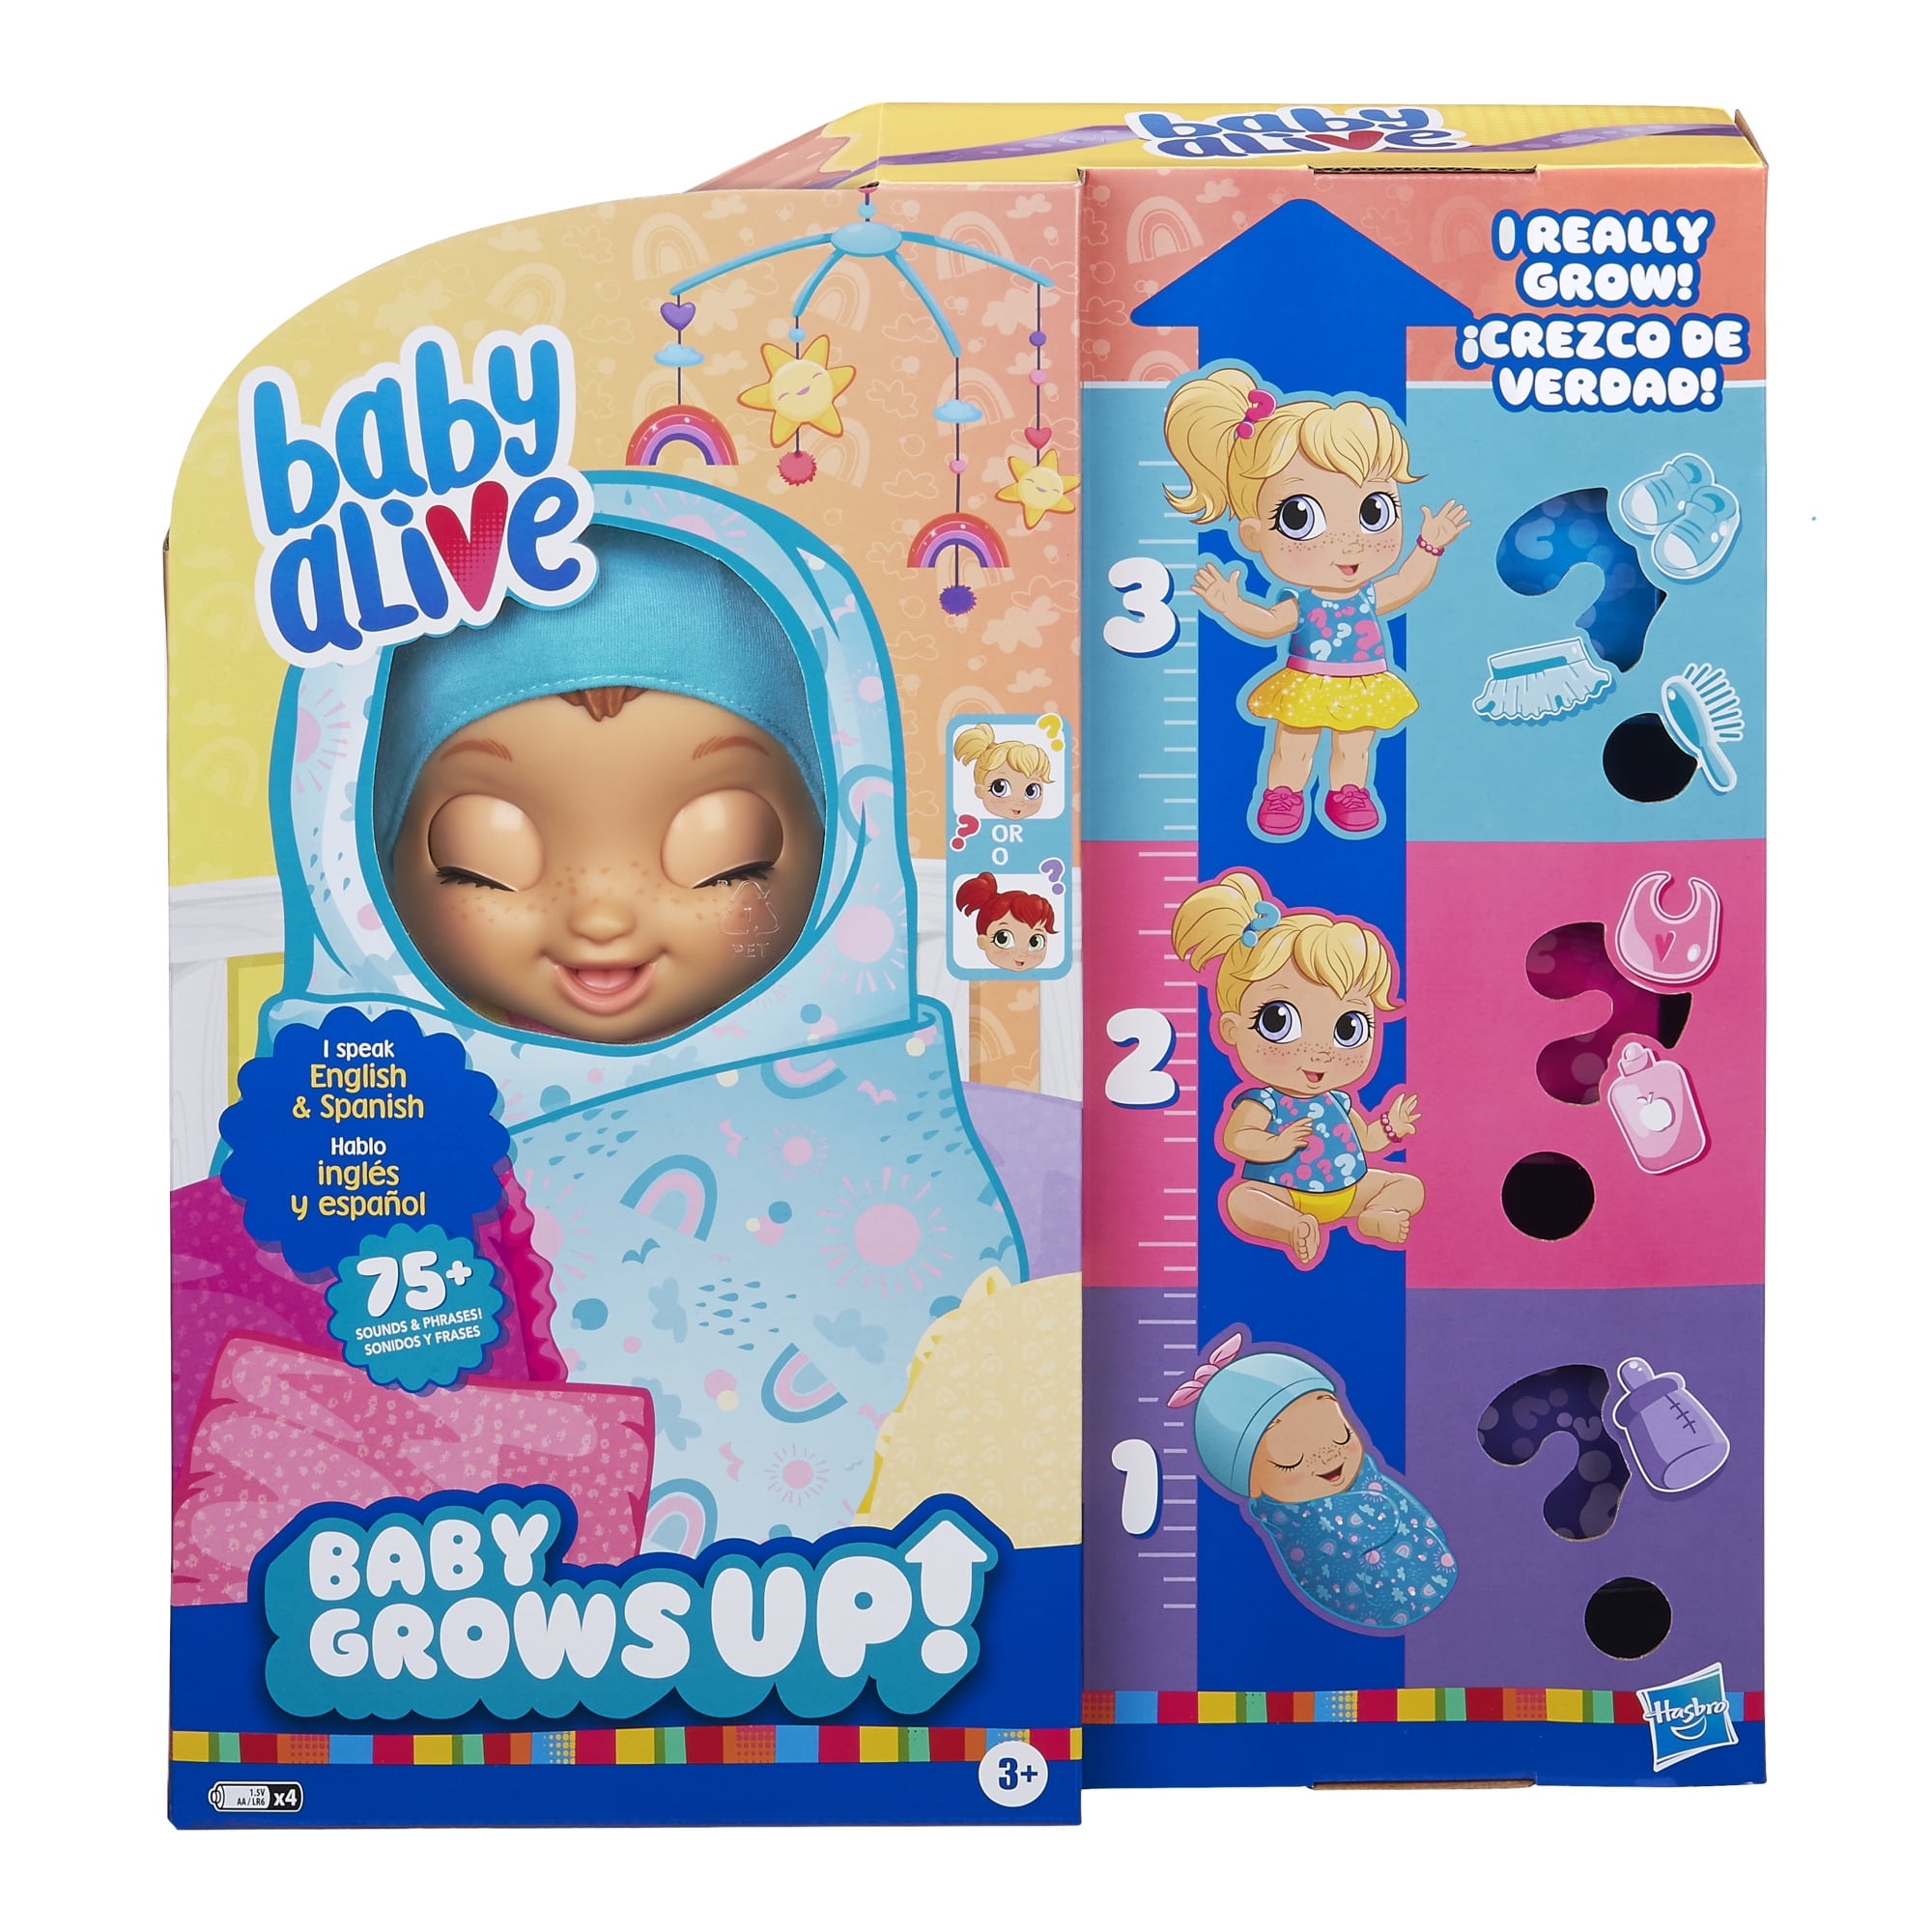 Kids Girls Talking Baby Doll With Accessories Pretend Play Toy Set 